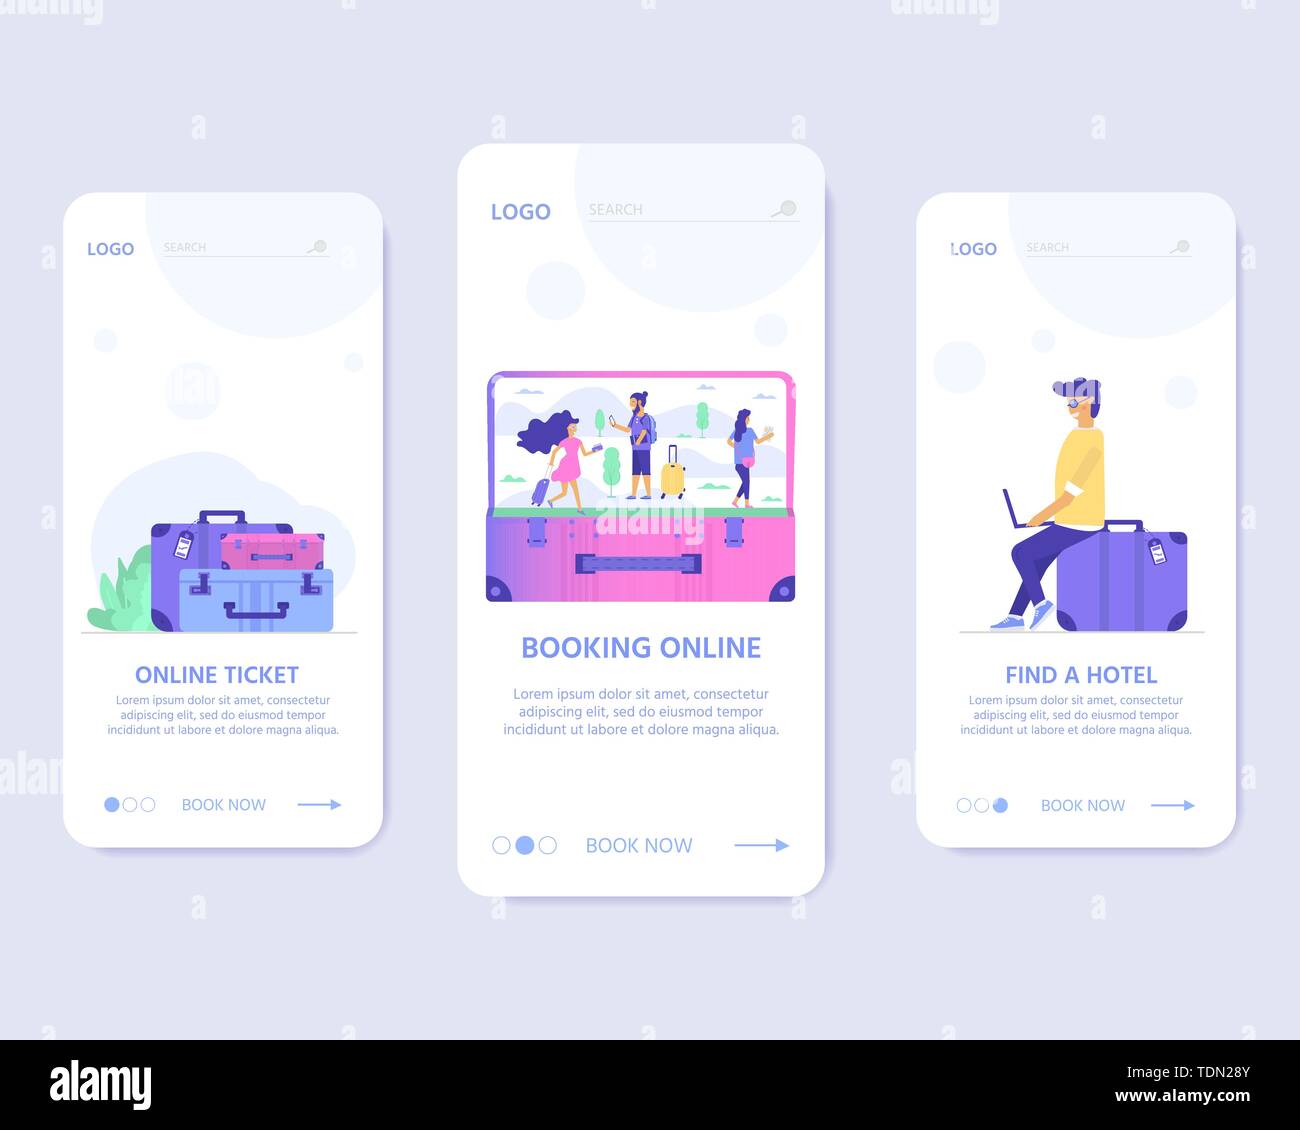 Young people with phone, bag and baggage. Travel and tourism concept for website template, online booking reservation, landing page, banner, flight ti Stock Vector